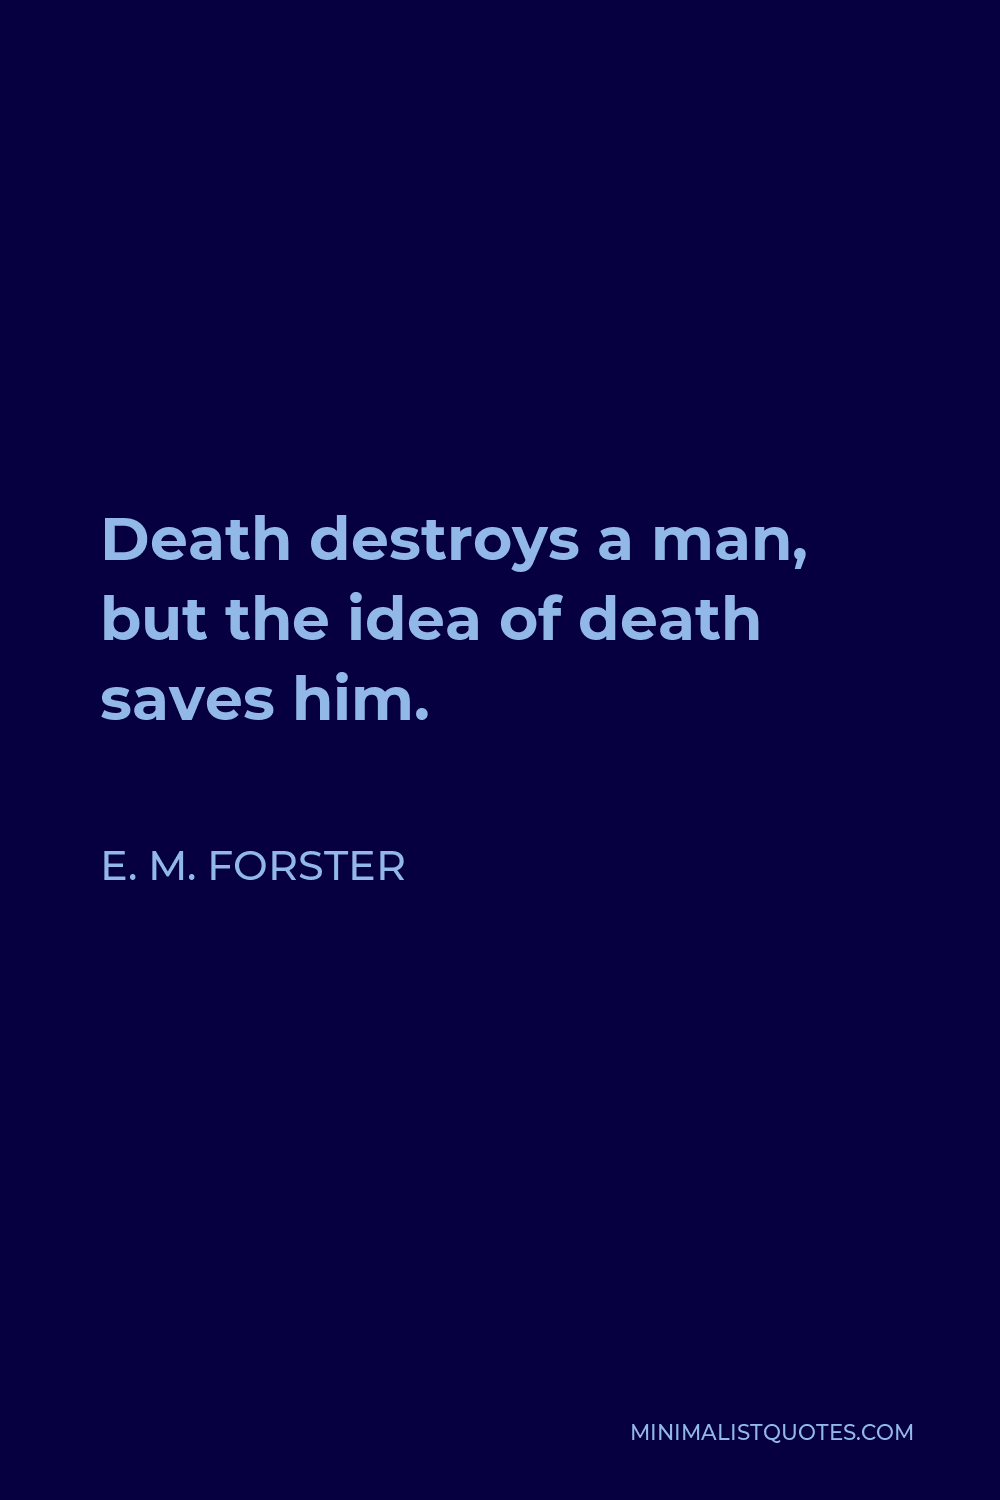 E. M. Forster Quote - Death destroys a man, but the idea of death saves him.